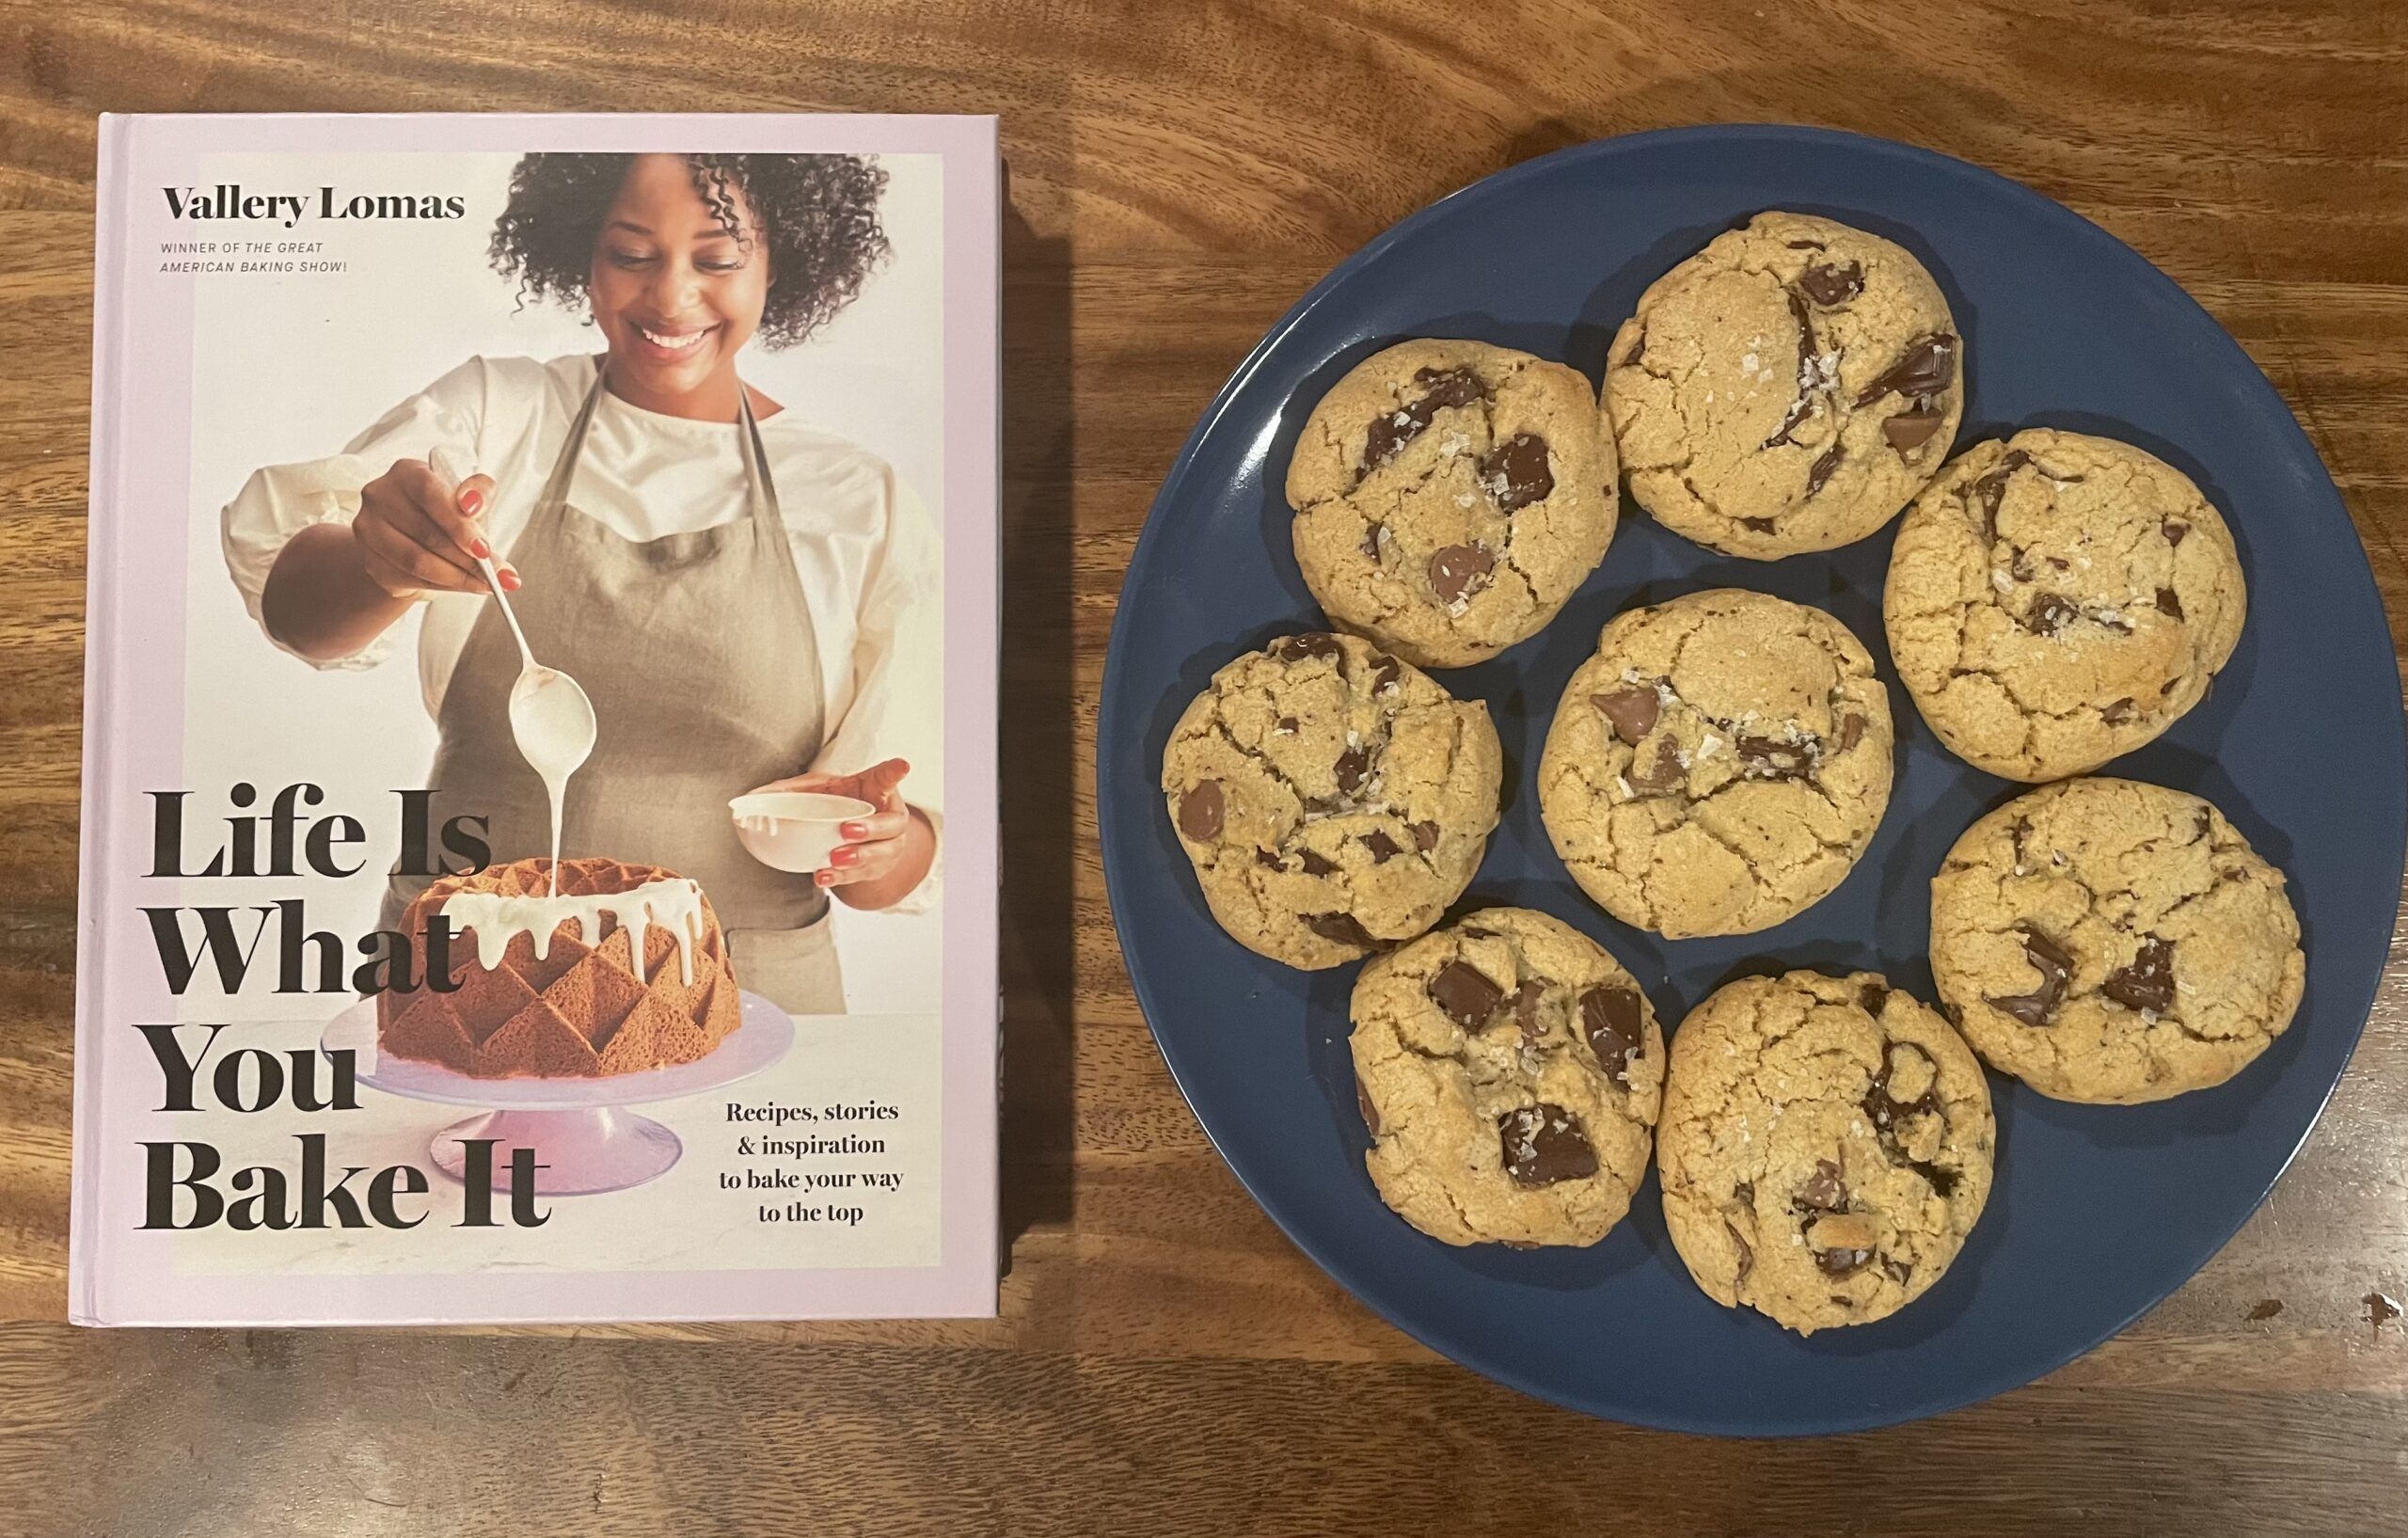 Life is What You Bake It cookbook on a wooden table next to a plate of chocolate chunk cookies.